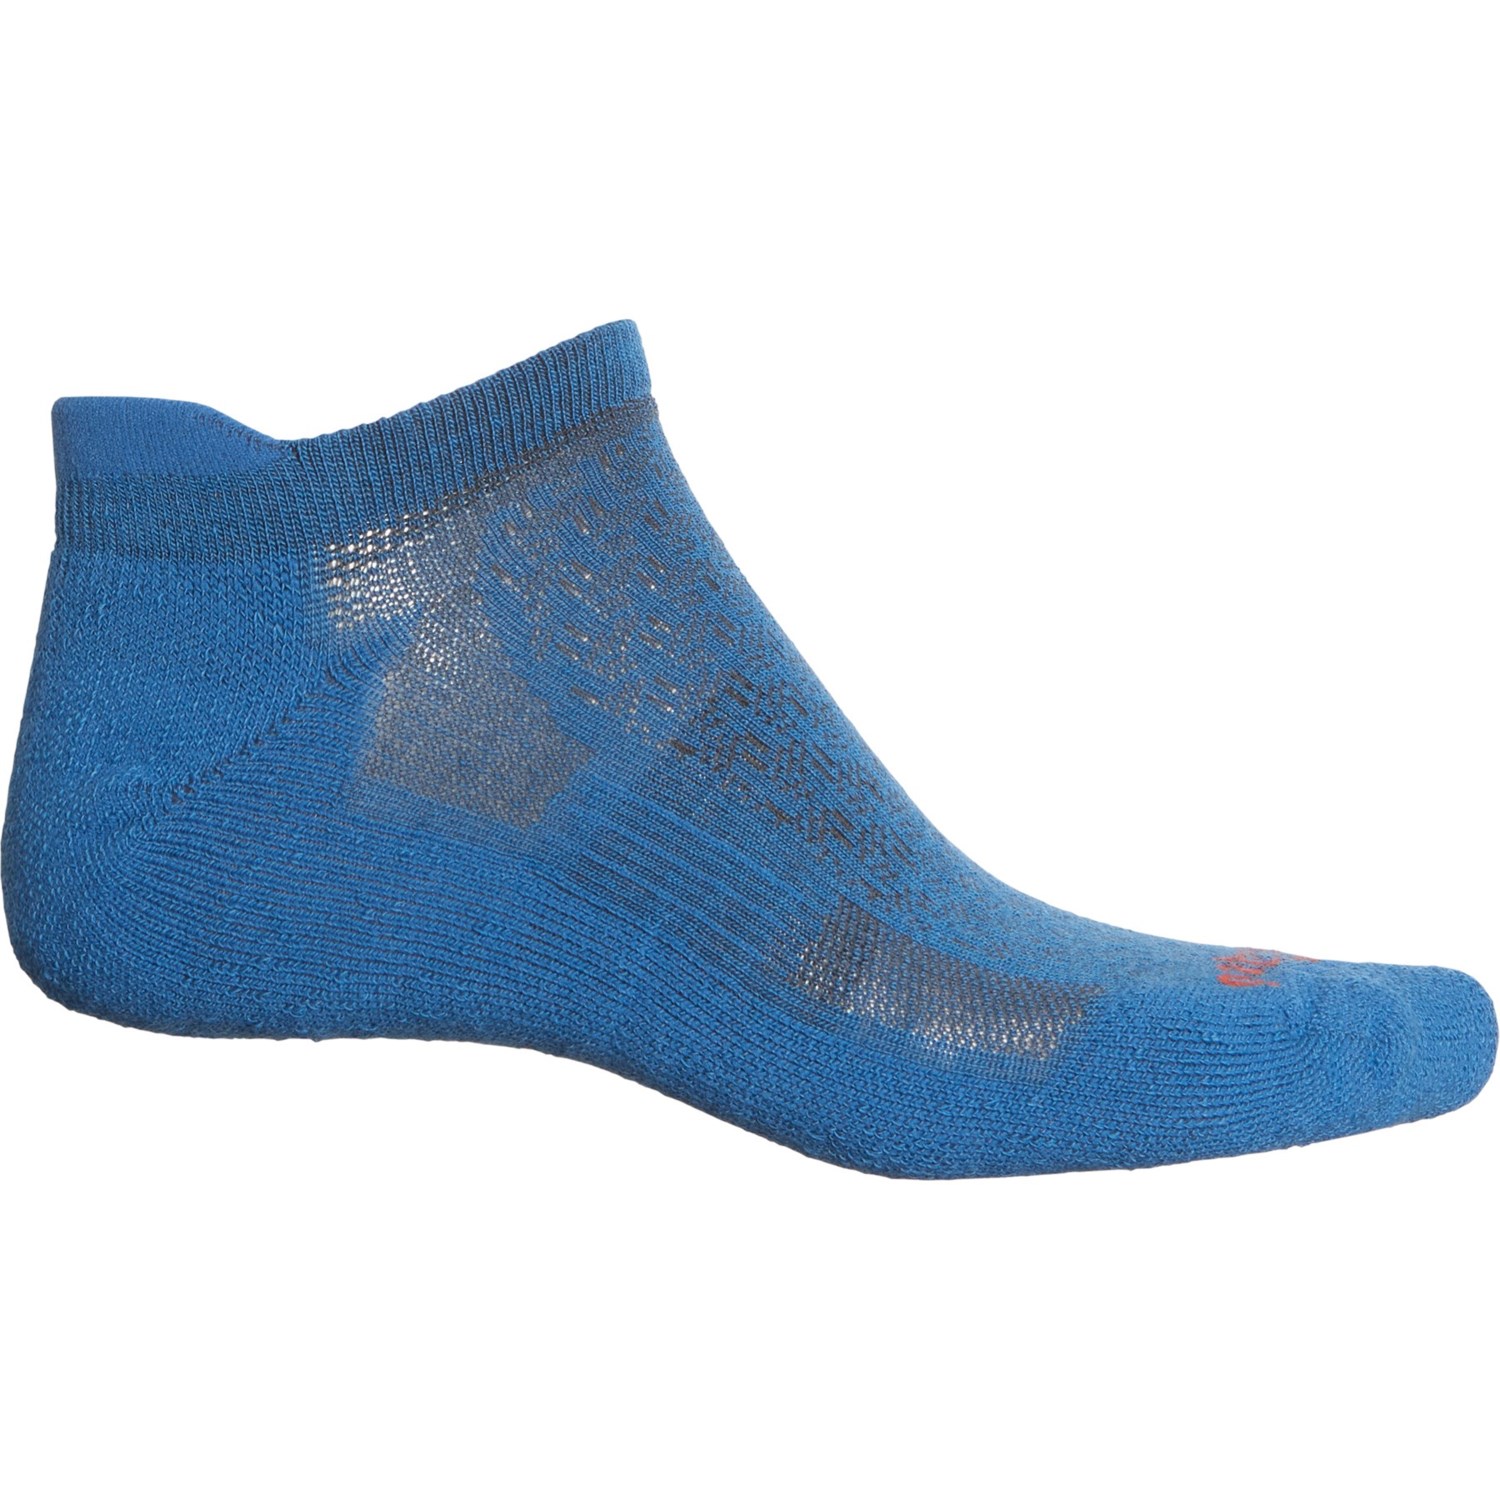 Patagonia Lightweight High-Performance Anklet Socks - Merino Wool, Below the Ankle (For Men and Women)